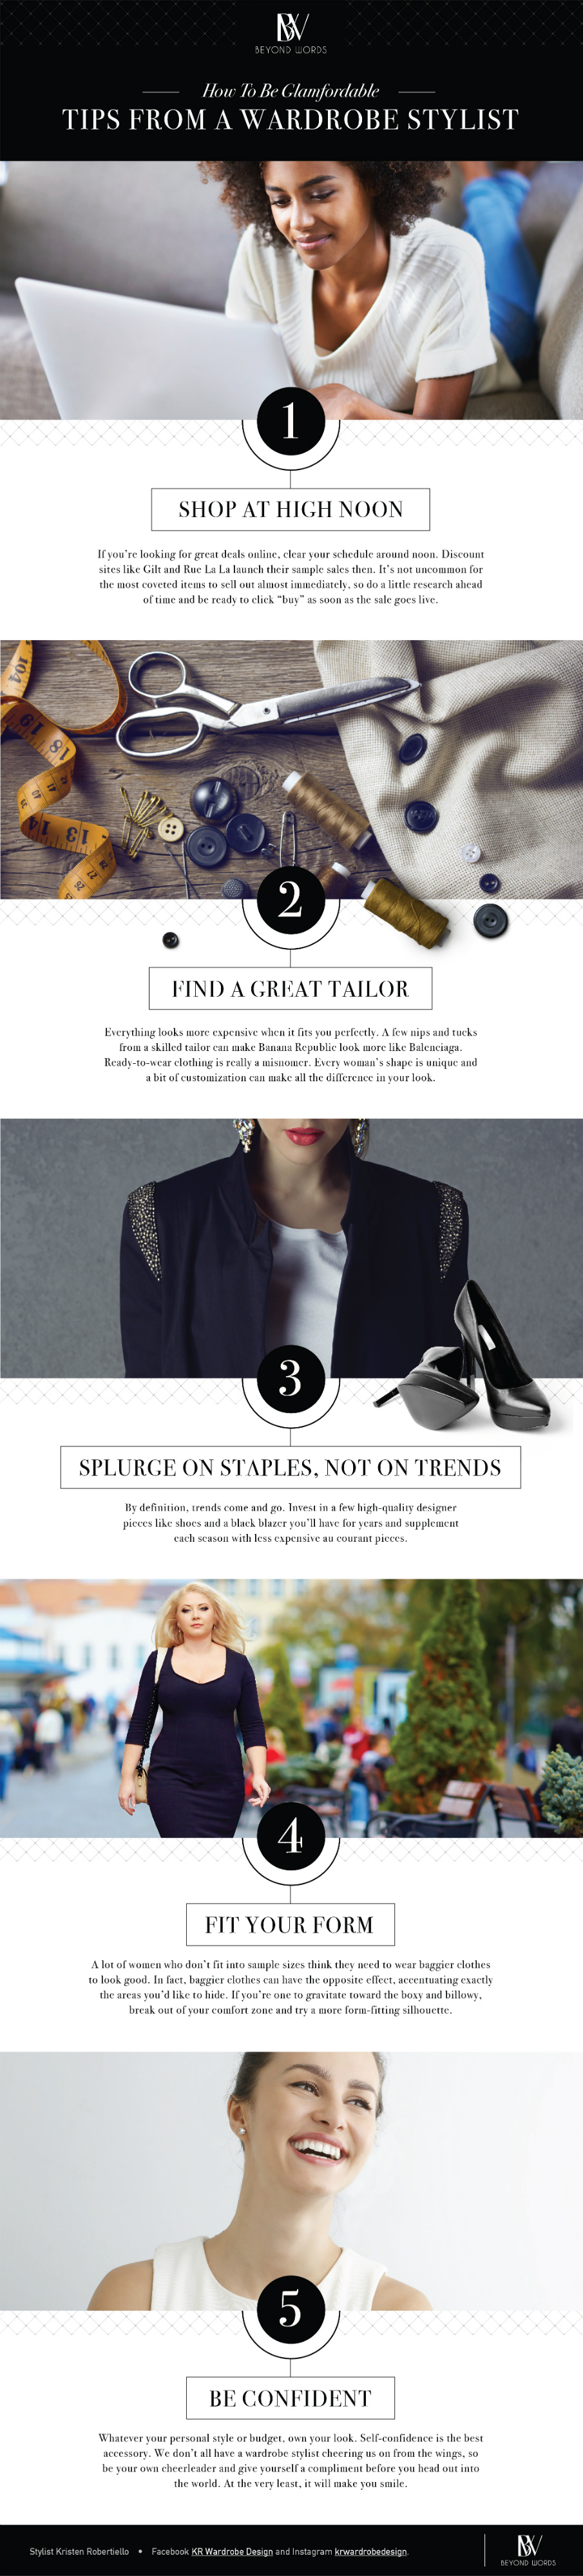 Fashion and Style tips Infographic